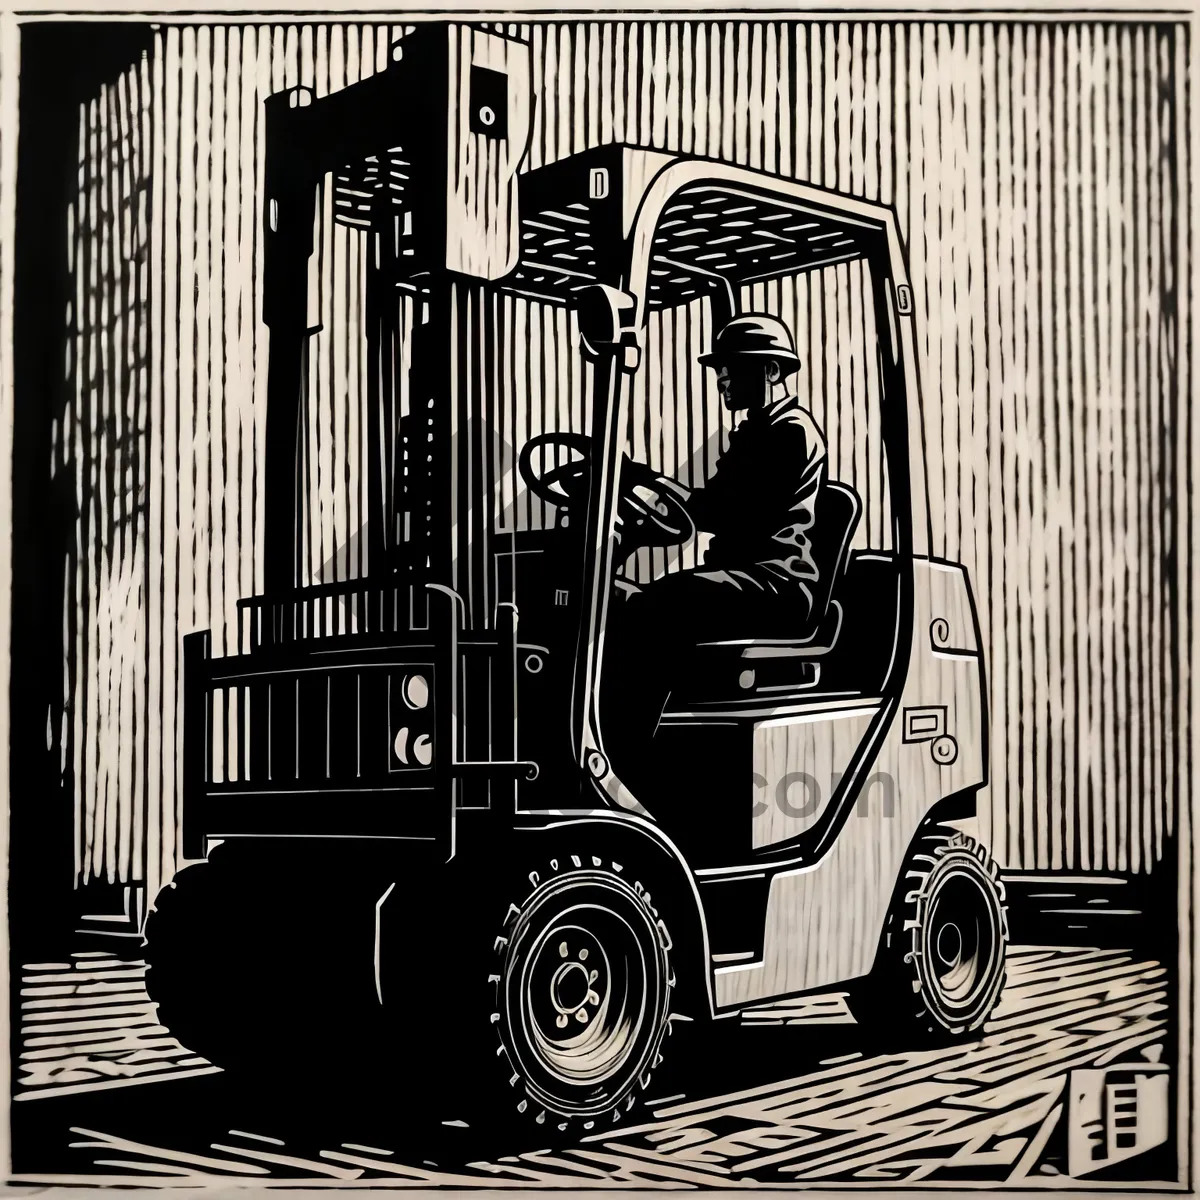 Picture of Vintage Freight Car with Forklift: Nostalgic Wheels of Transportation.